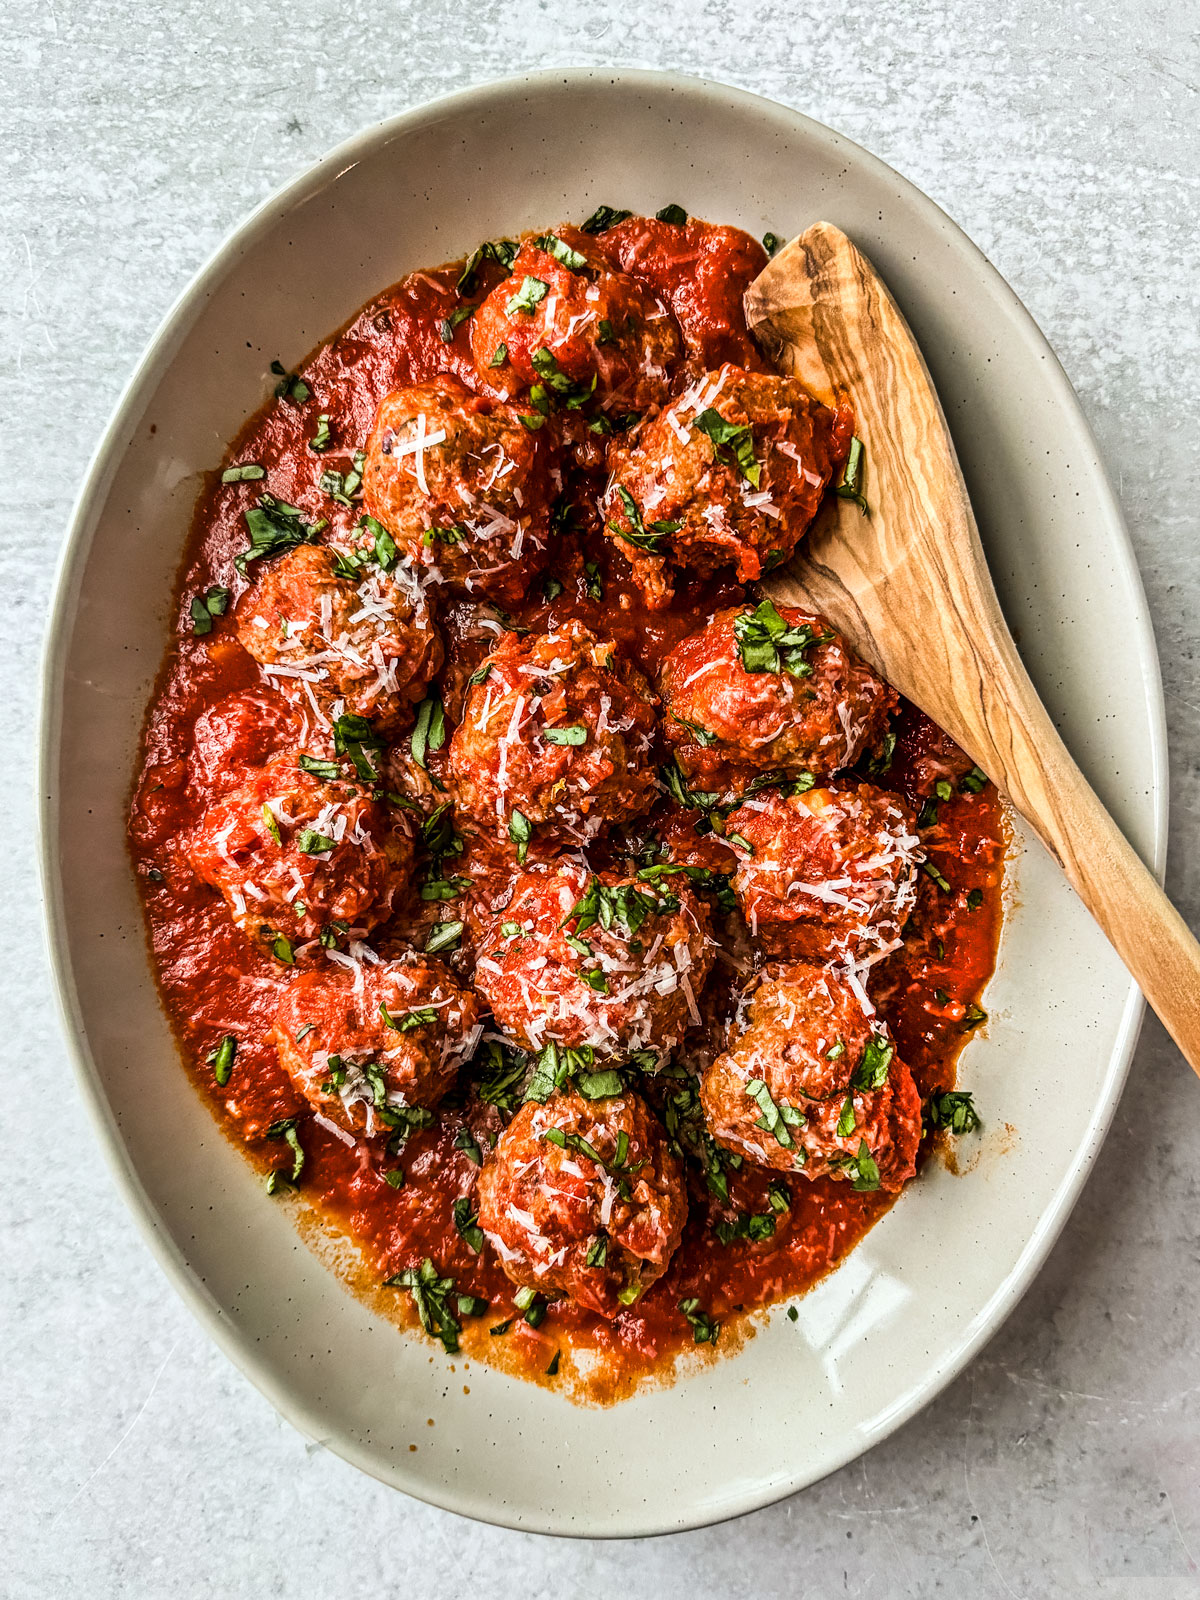 Ground turkey meatballs in sauce presented in a serving dish.